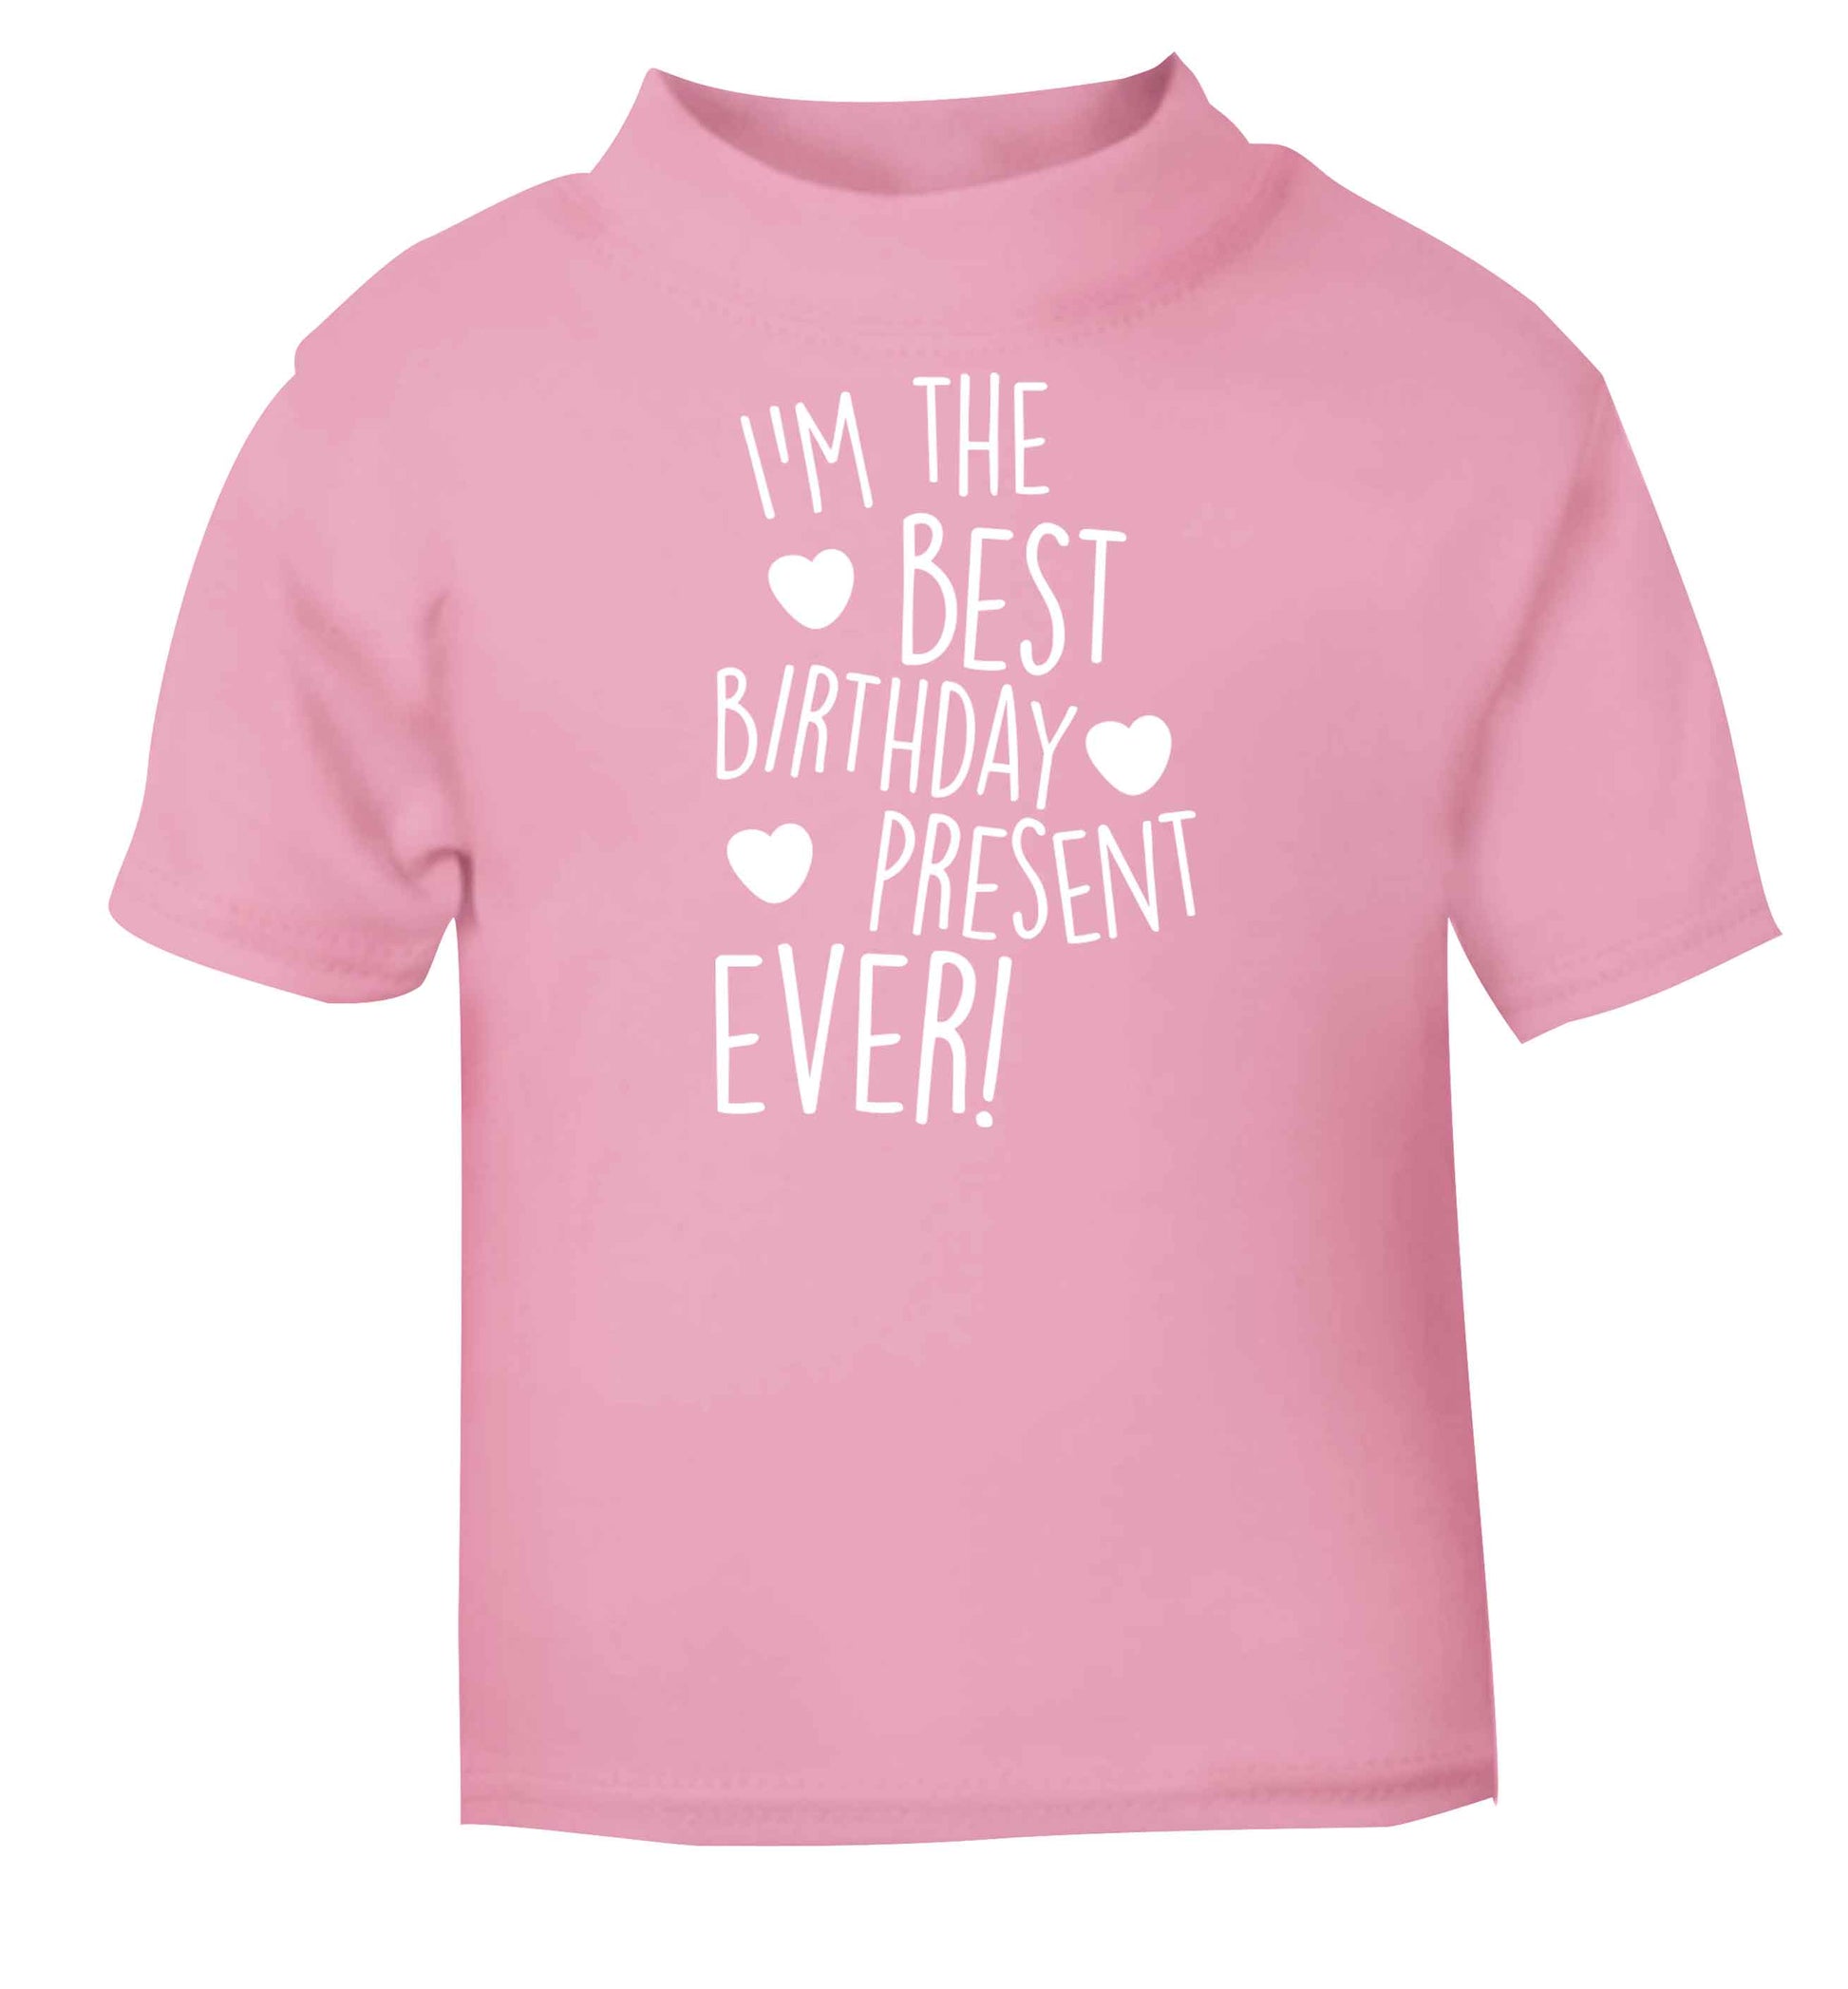 I'm the best birthday present ever light pink baby toddler Tshirt 2 Years